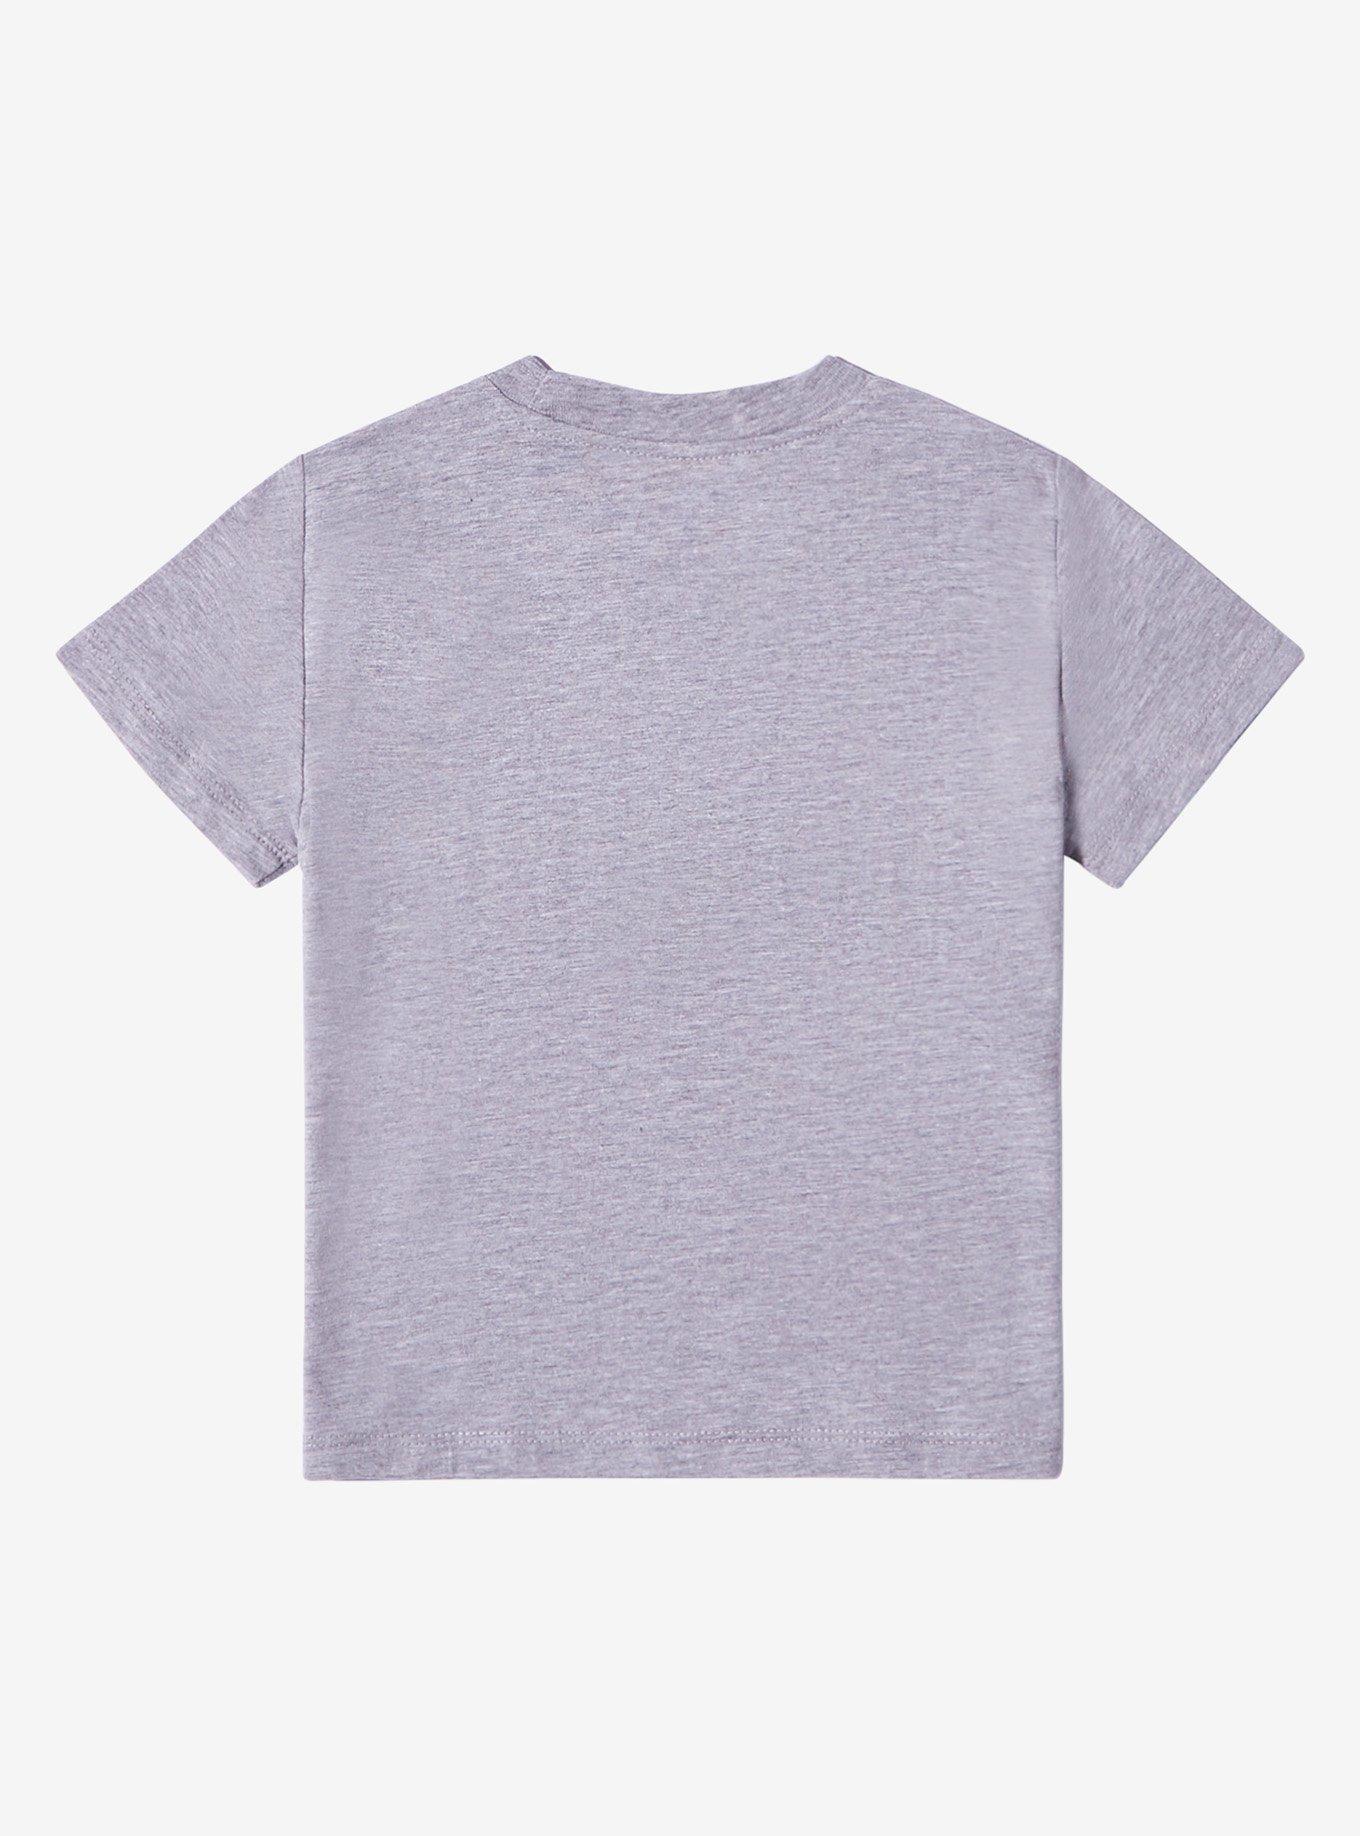 Bluey Dance Mode Toddler T-Shirt - BoxLunch Exclusive, GREY, alternate